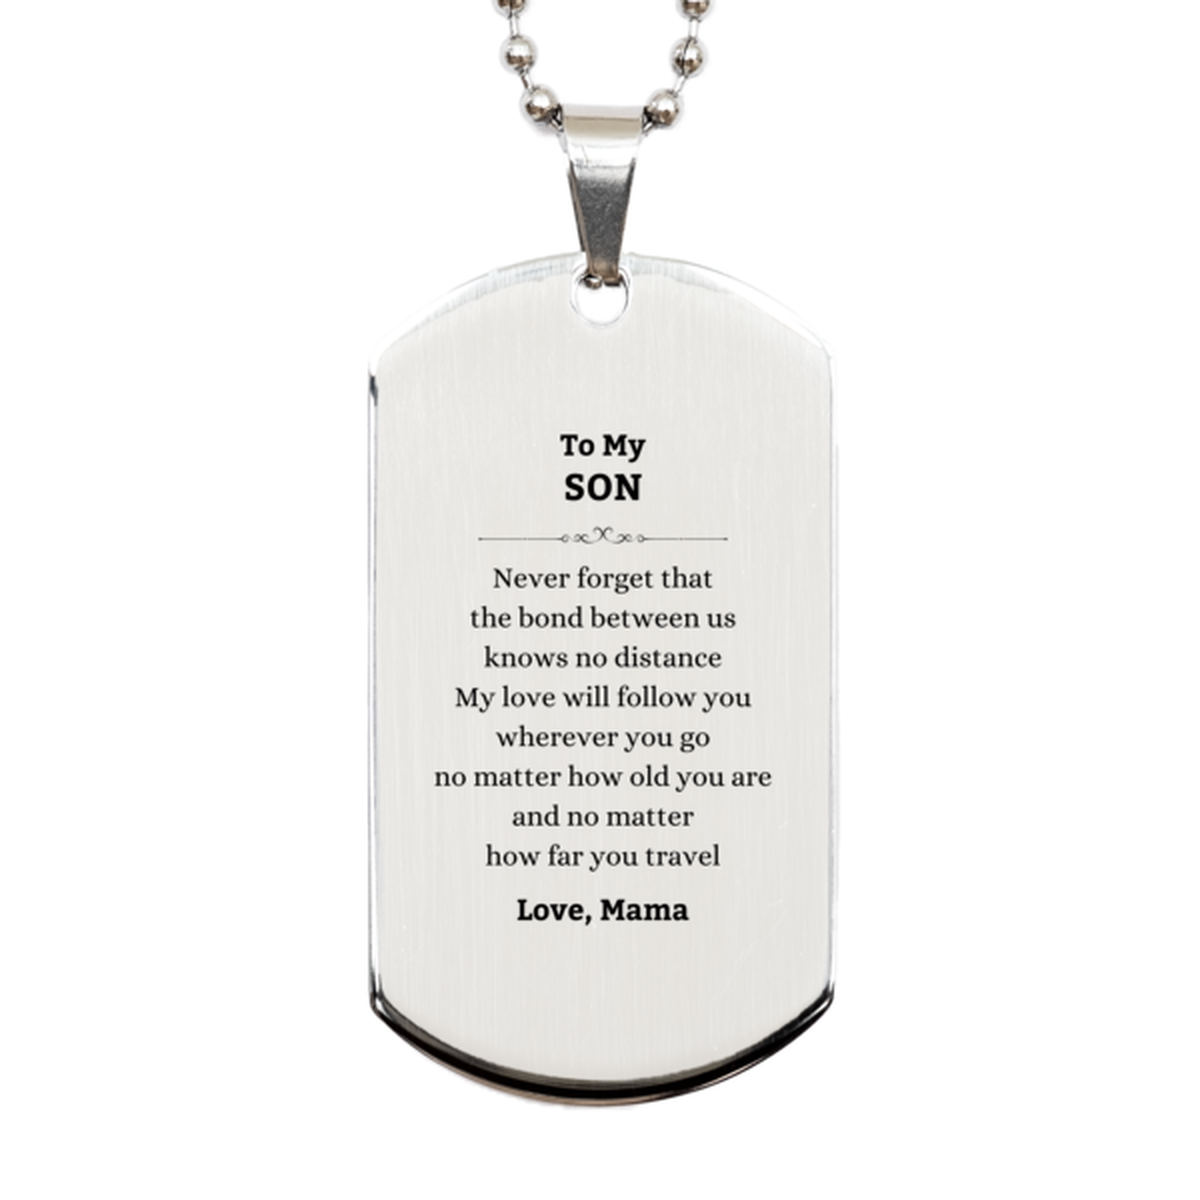 Son Birthday Gifts from Mama, Adjustable Silver Dog Tag for Son Christmas Graduation Unique Gifts Son Never forget that the bond between us knows no distance. Love, Mama